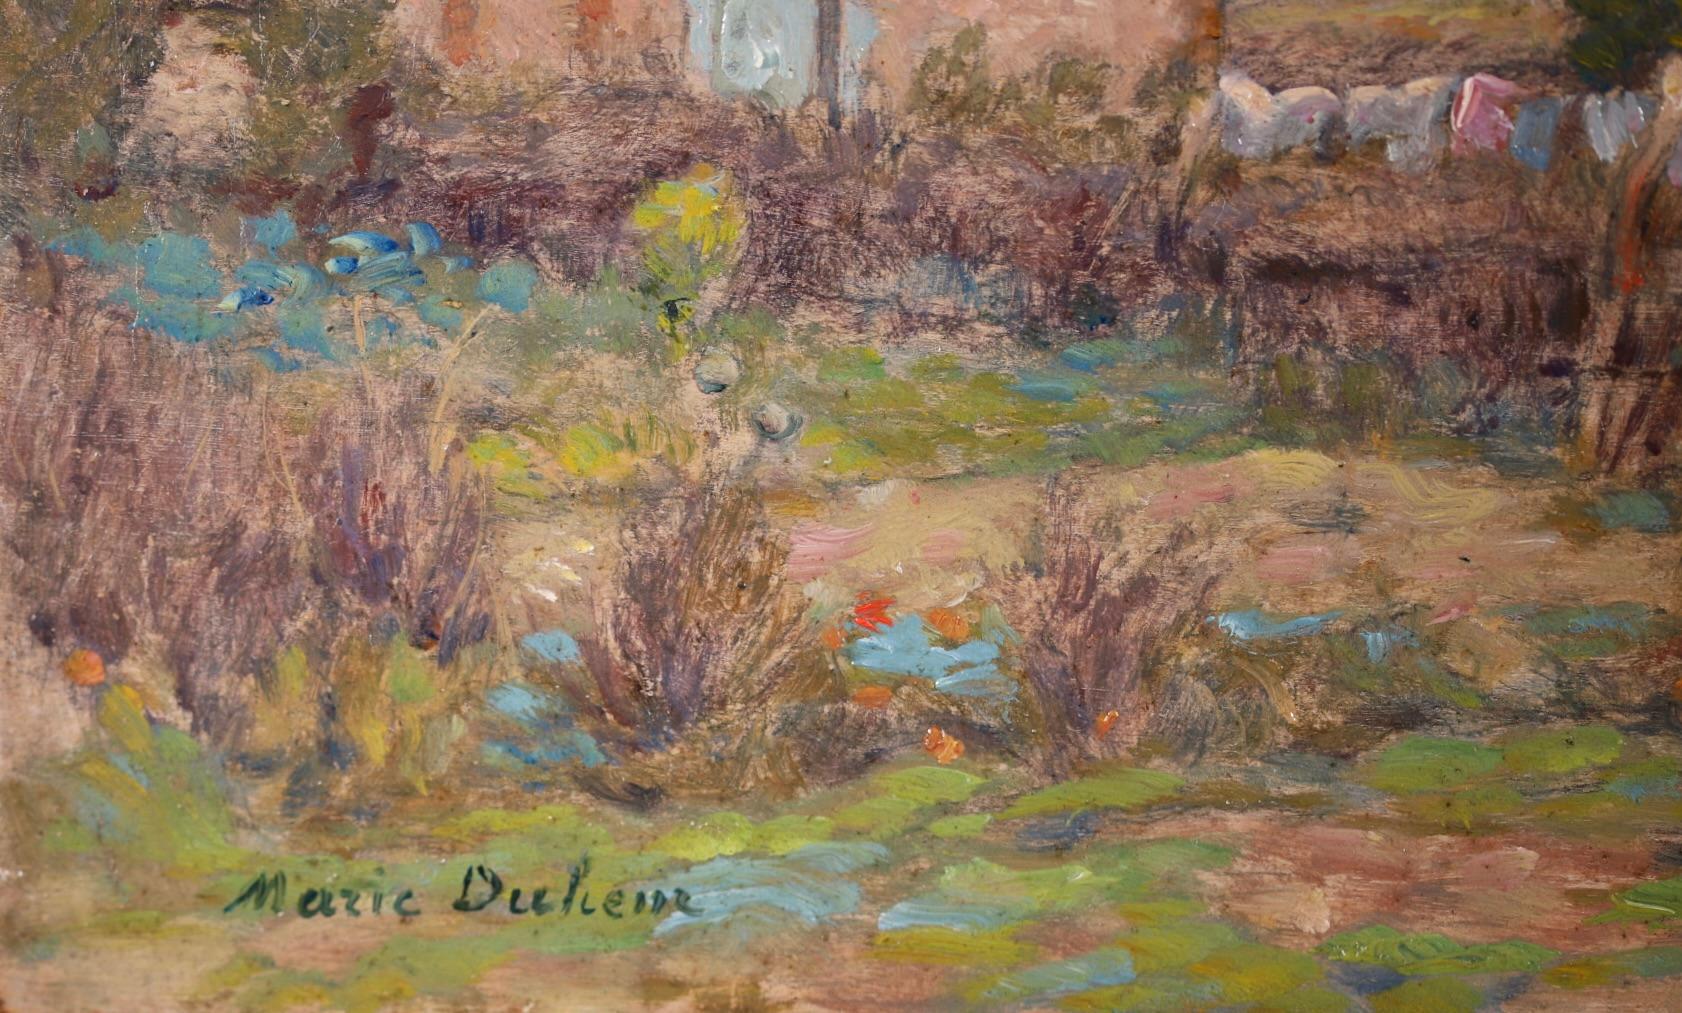 A charming oil on panel circa 1905 by French impressionist painter Marie Duhem. The work depicts a small cottage in a rural landscape with sheets drying on the washing line. A beautifully brushed piece. 

Signature:
Signed lower